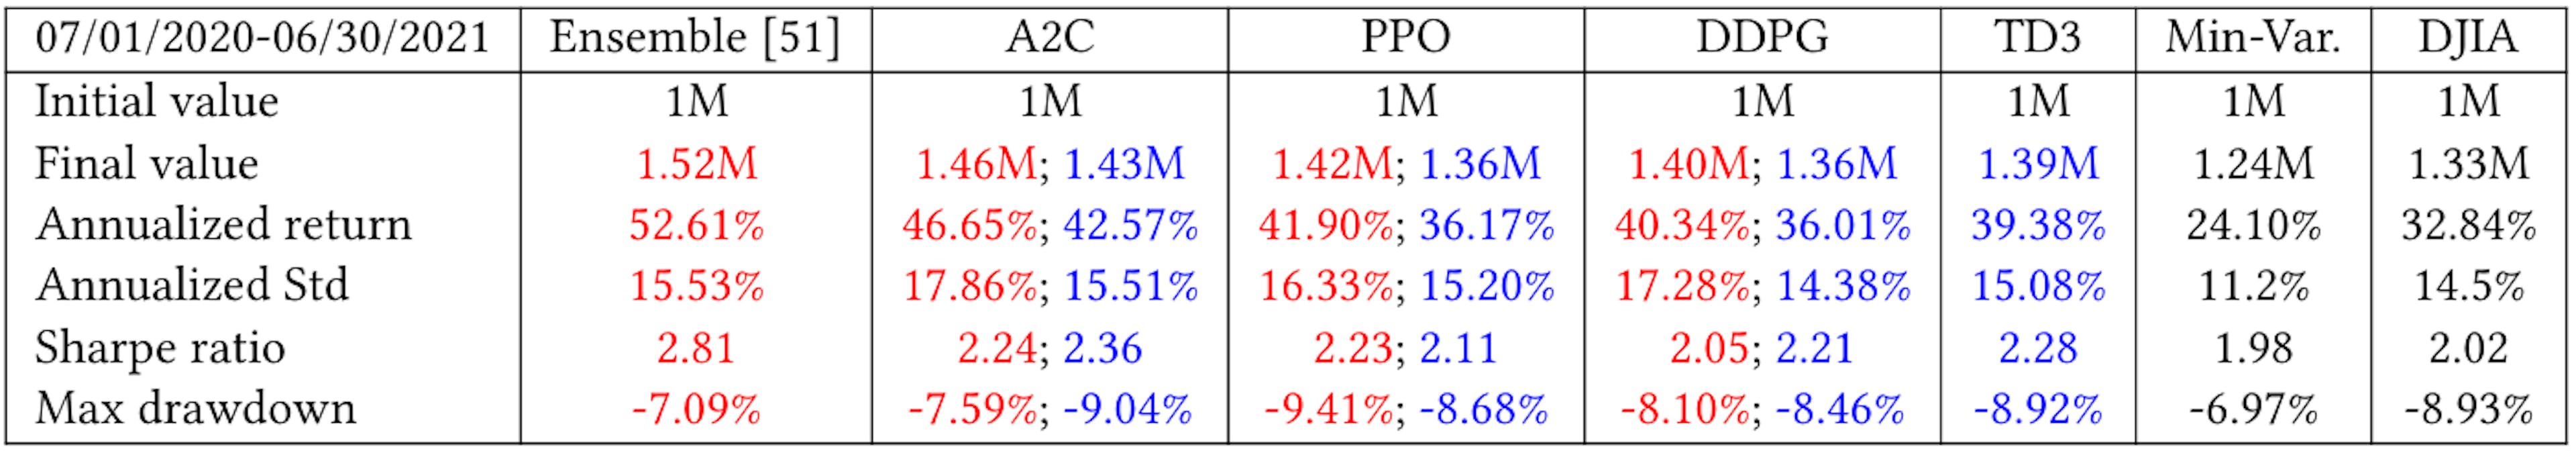 Table 3: Performance of stock trading and portfolio allocation over the DJIA constituents stocks using FinRL. The Sharpe ratios of the ensemble strategy and the individual DRL agents excceed those of the DJIA index, and of the min-variance strategy.